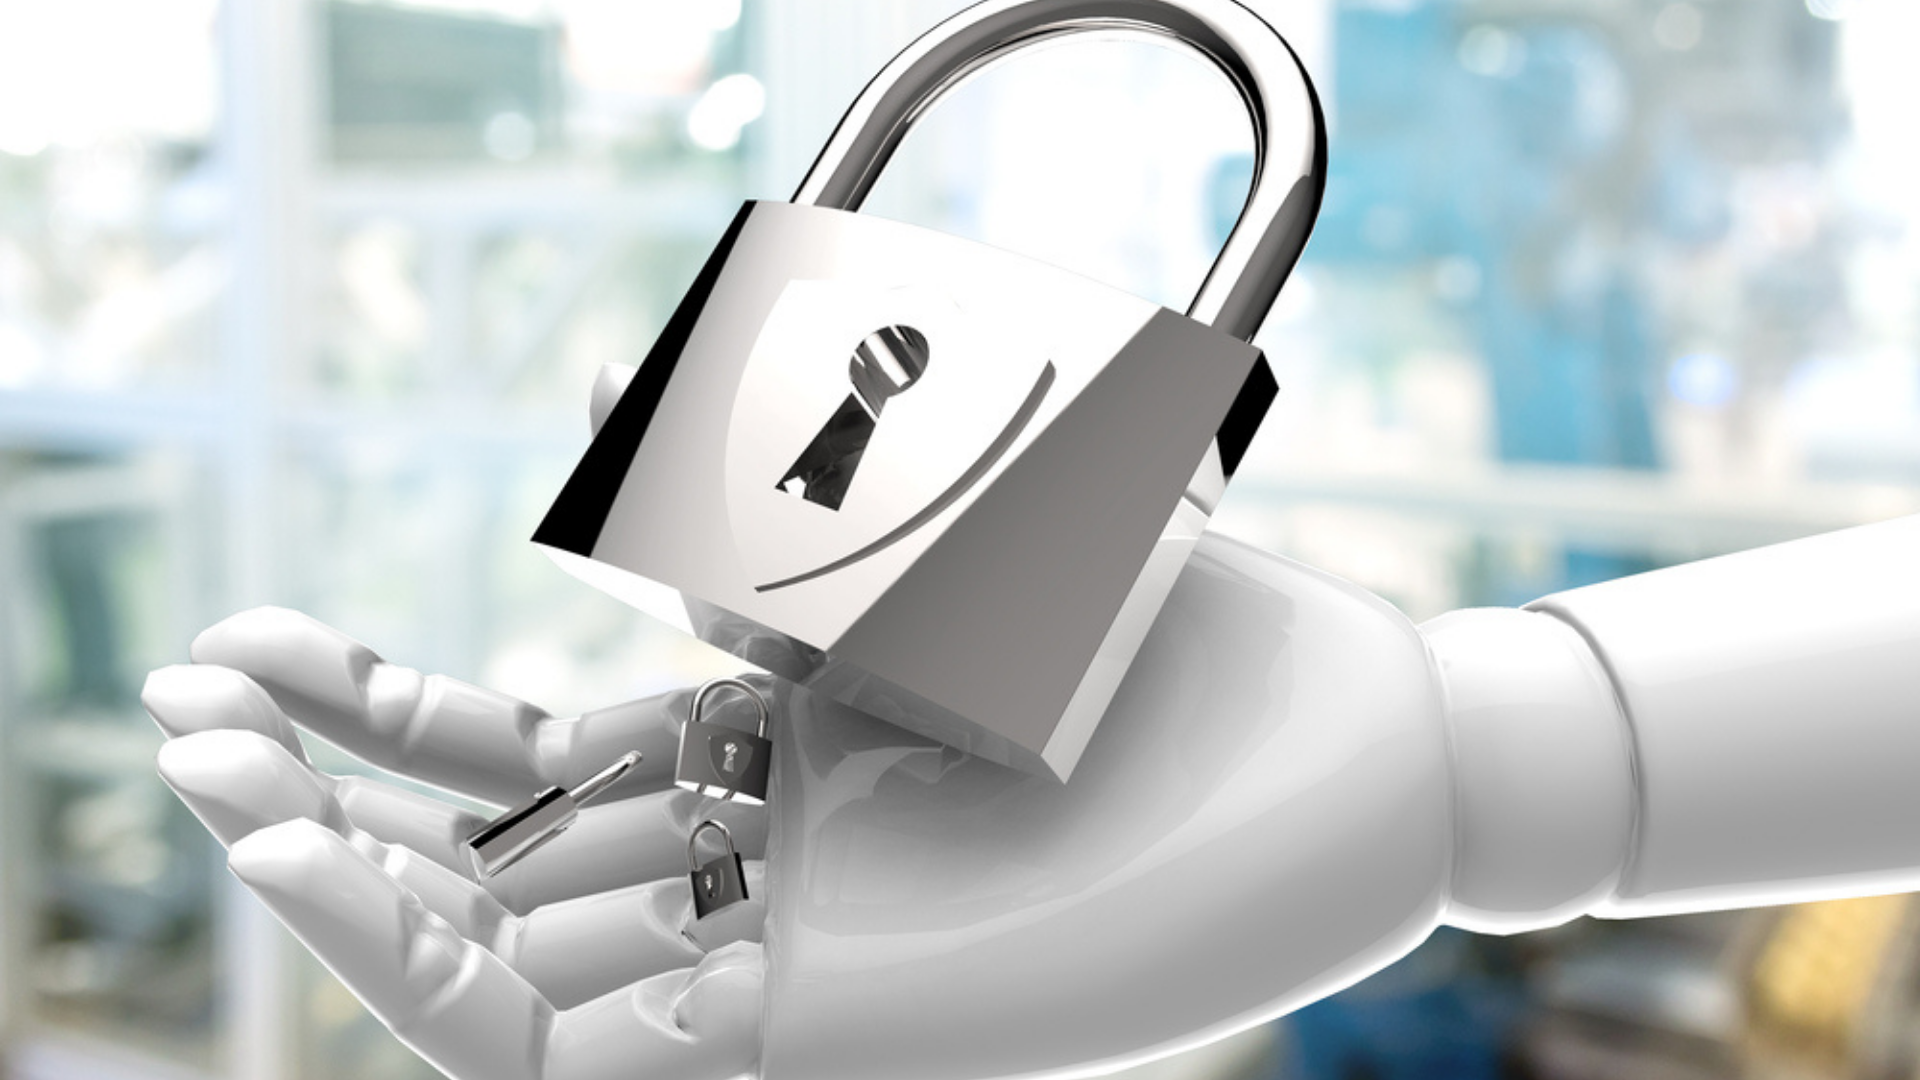 a padlock held by the hand of a robot, related to AI cybersecutiry